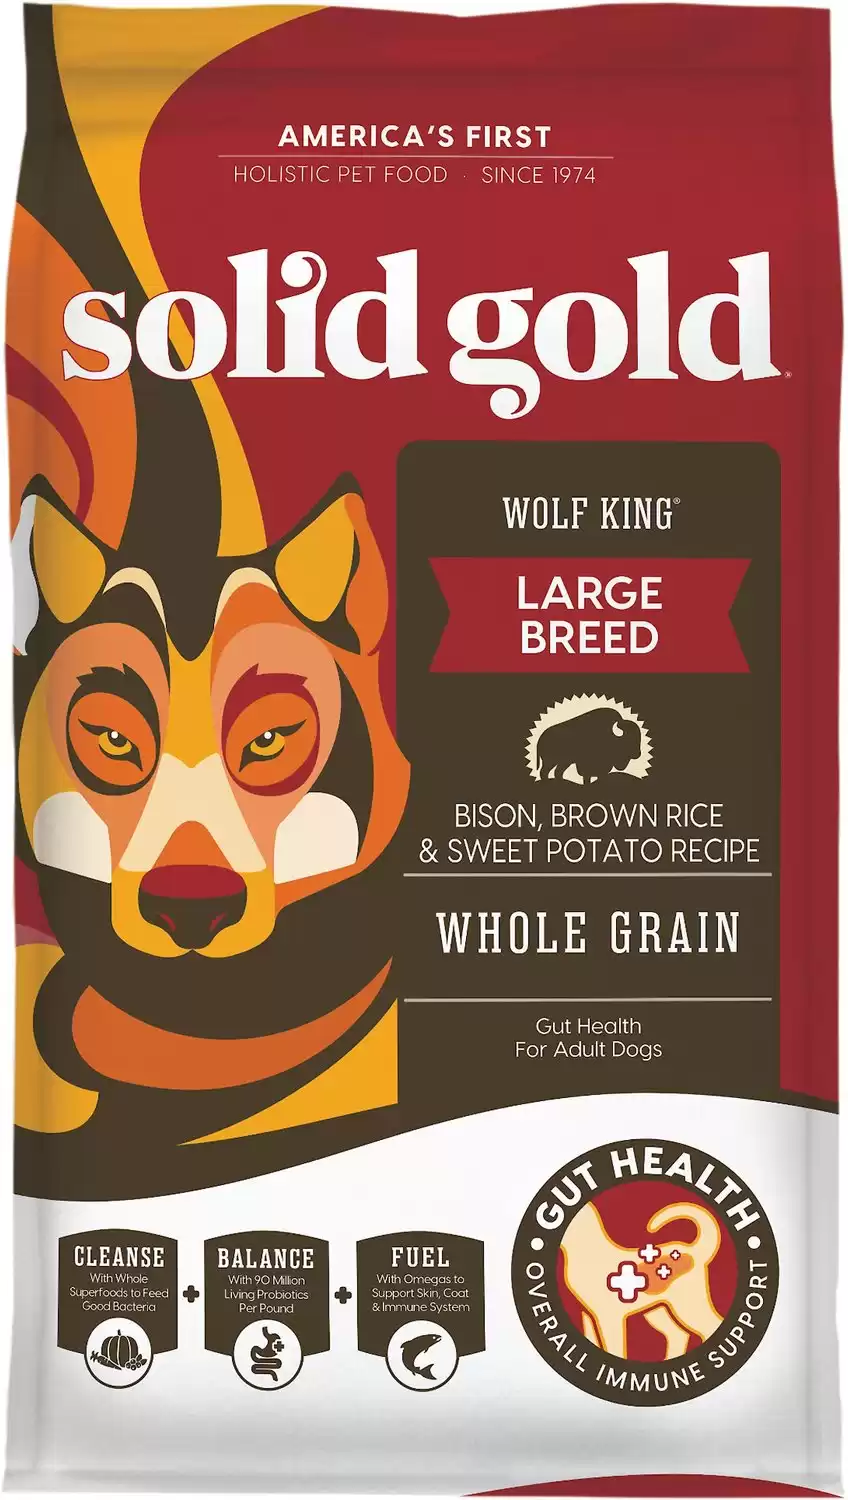 Solid Gold Wolf King Bison & Brown Rice Recipe